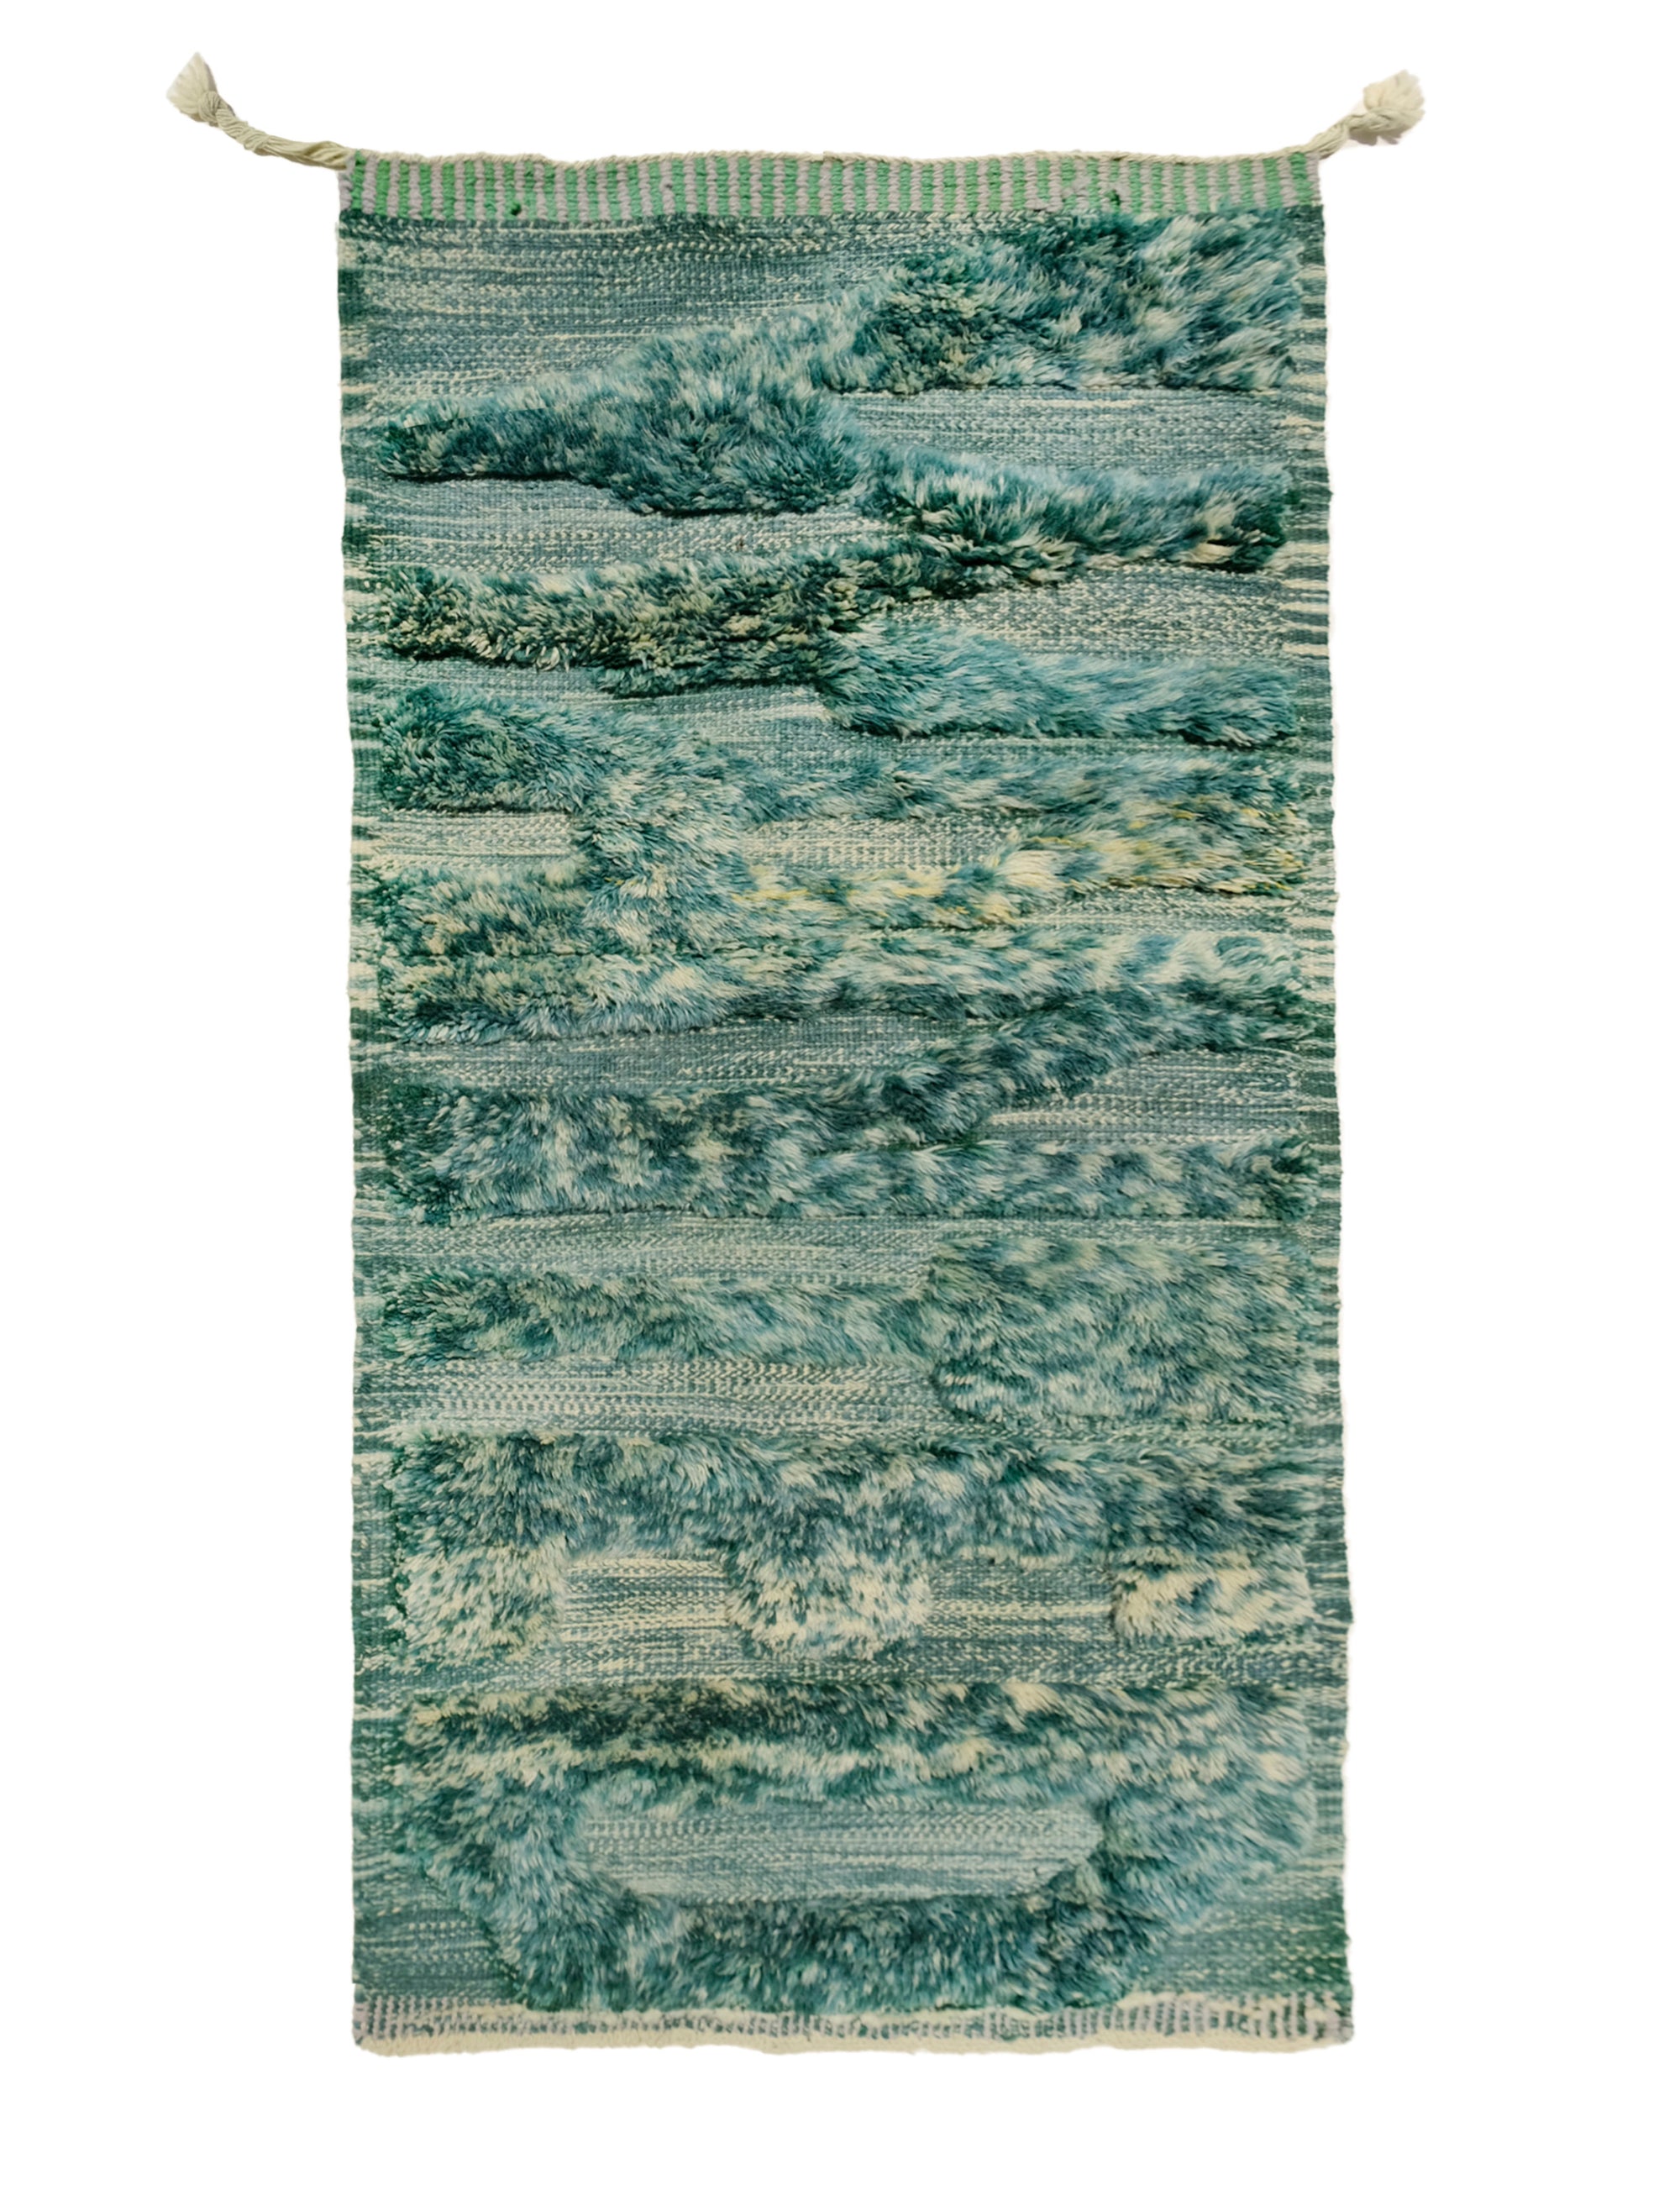  "Verdant Whispers Wanted Rug" from Purple Mountain Rugs, where lush greens meet an intriguing message. This rug is meticulously crafted using a unique combination of different shade yarns to create a captivating visual effect. The word "WANTED" is artistically woven into the rug with a fuzzy texture, gradually fading into the verdant hues of green.